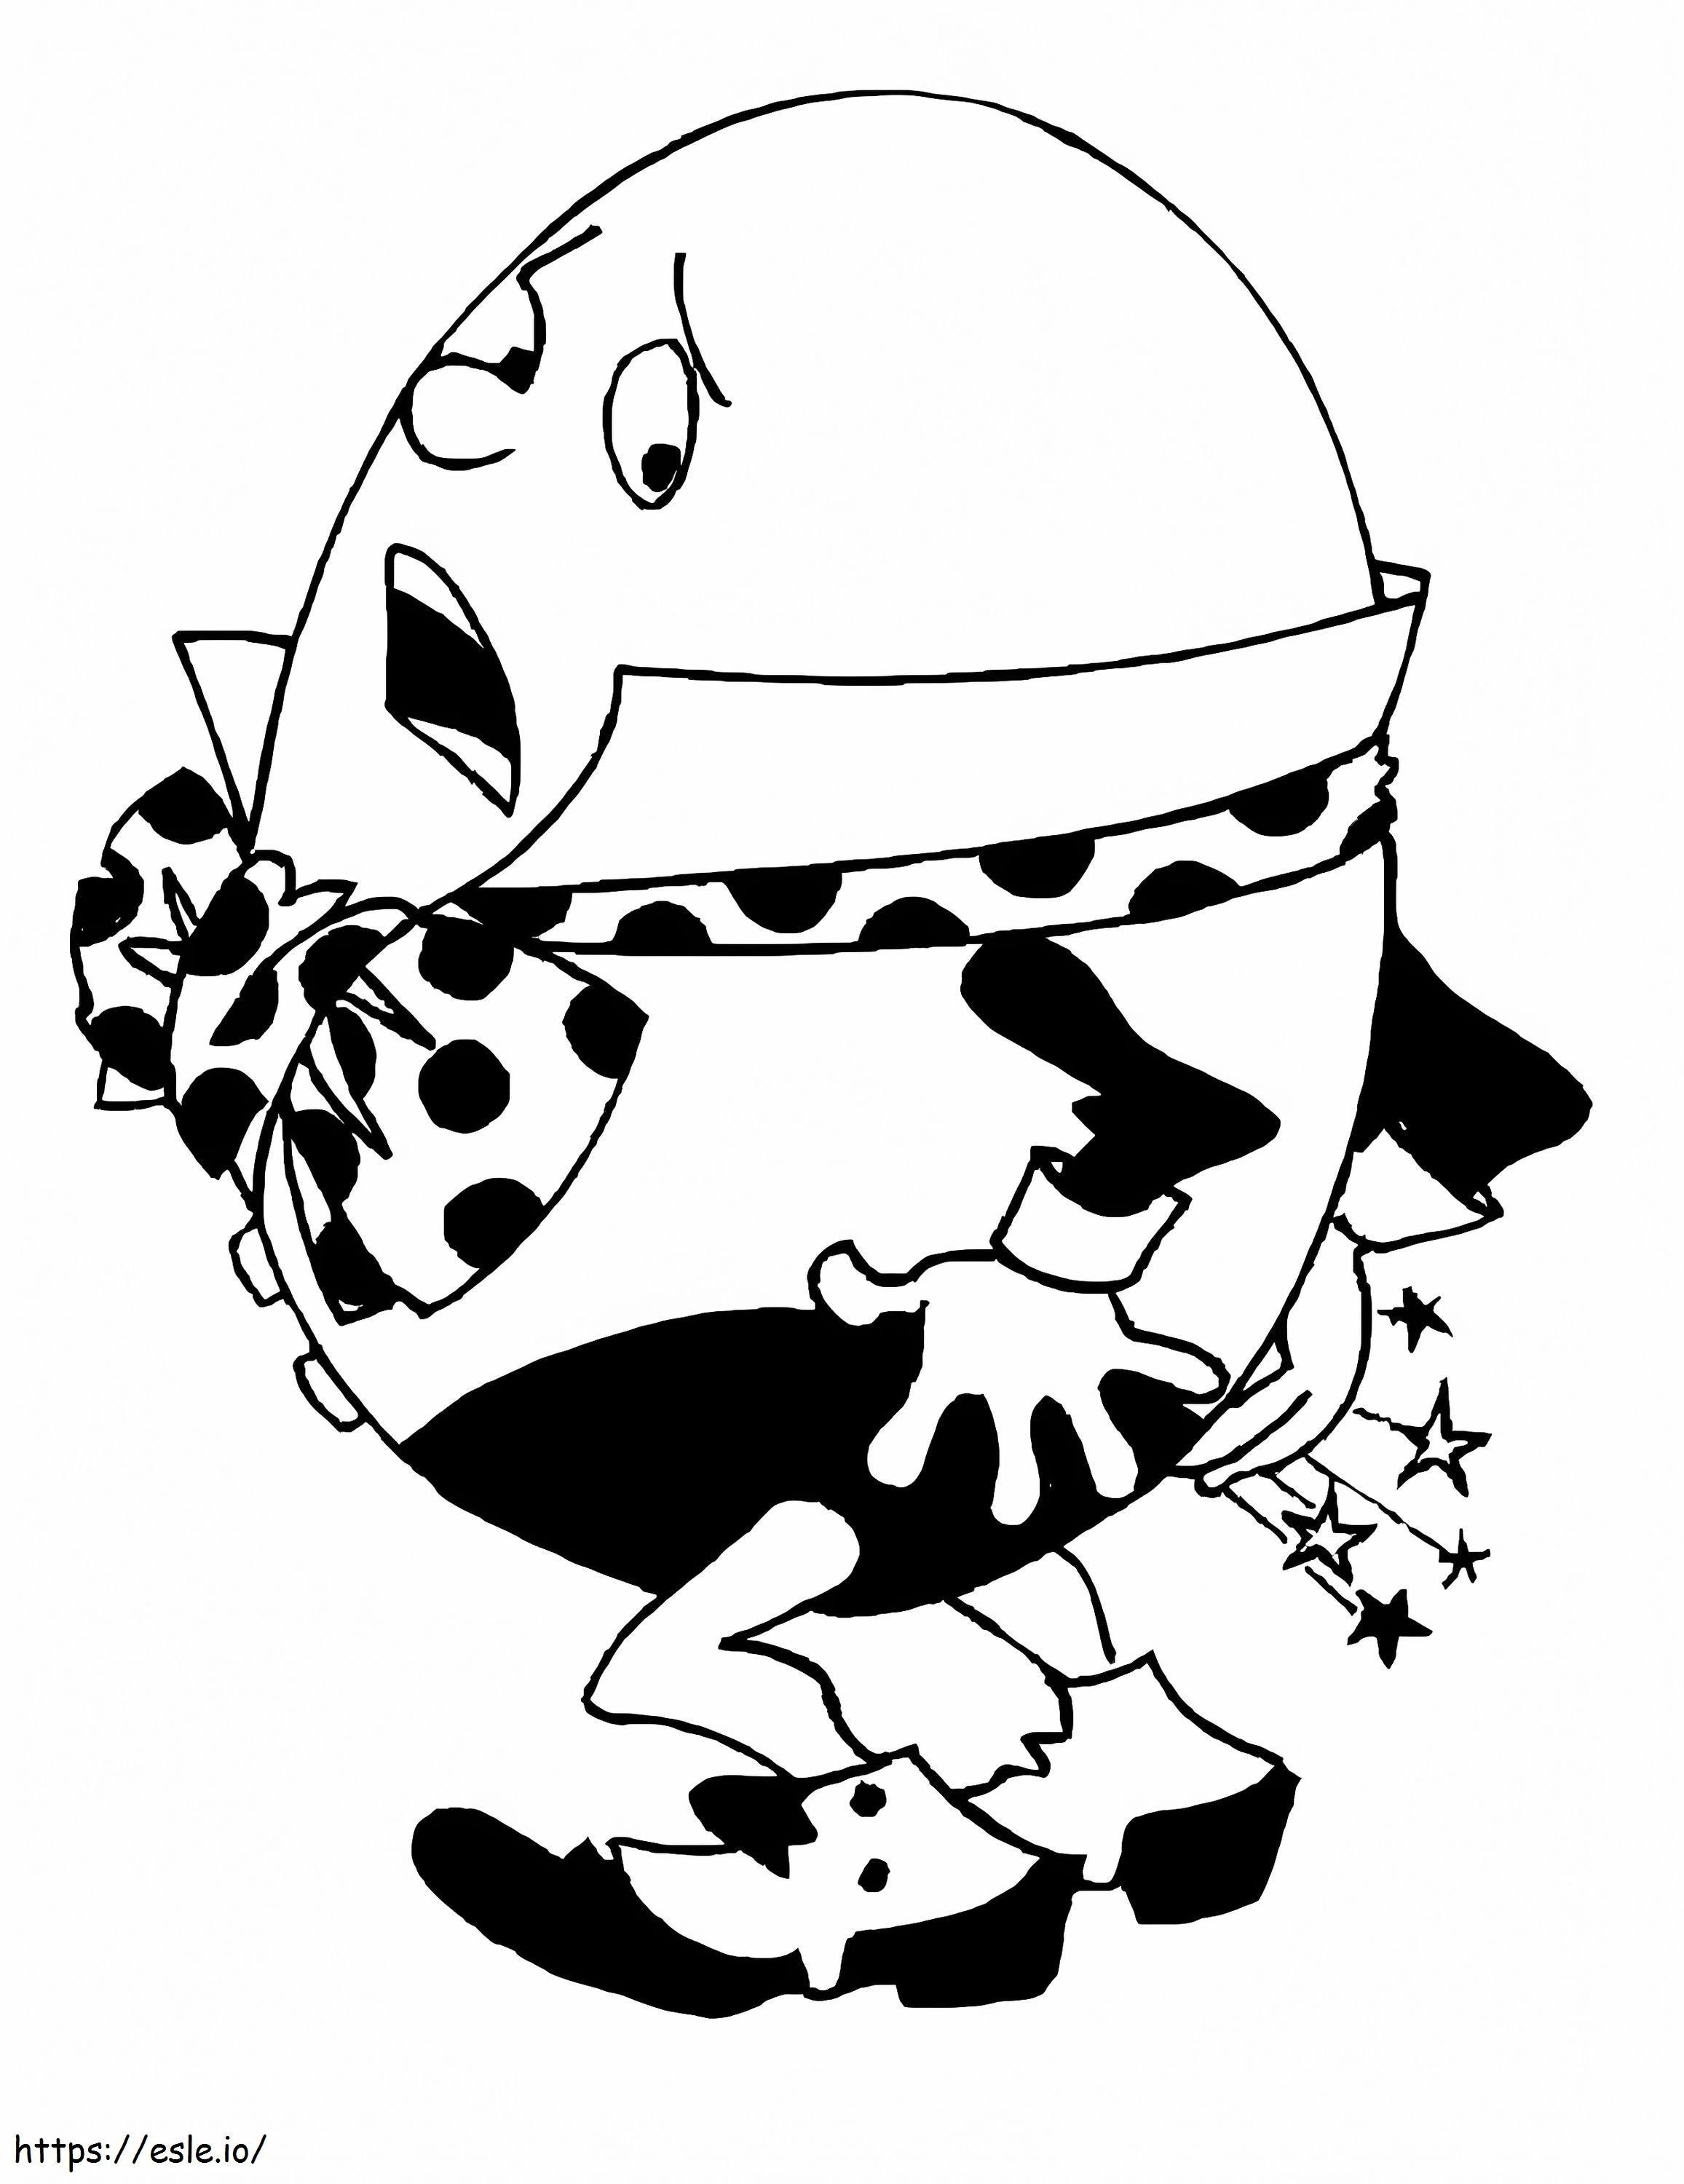 Humpty Dumpty 1 coloring page